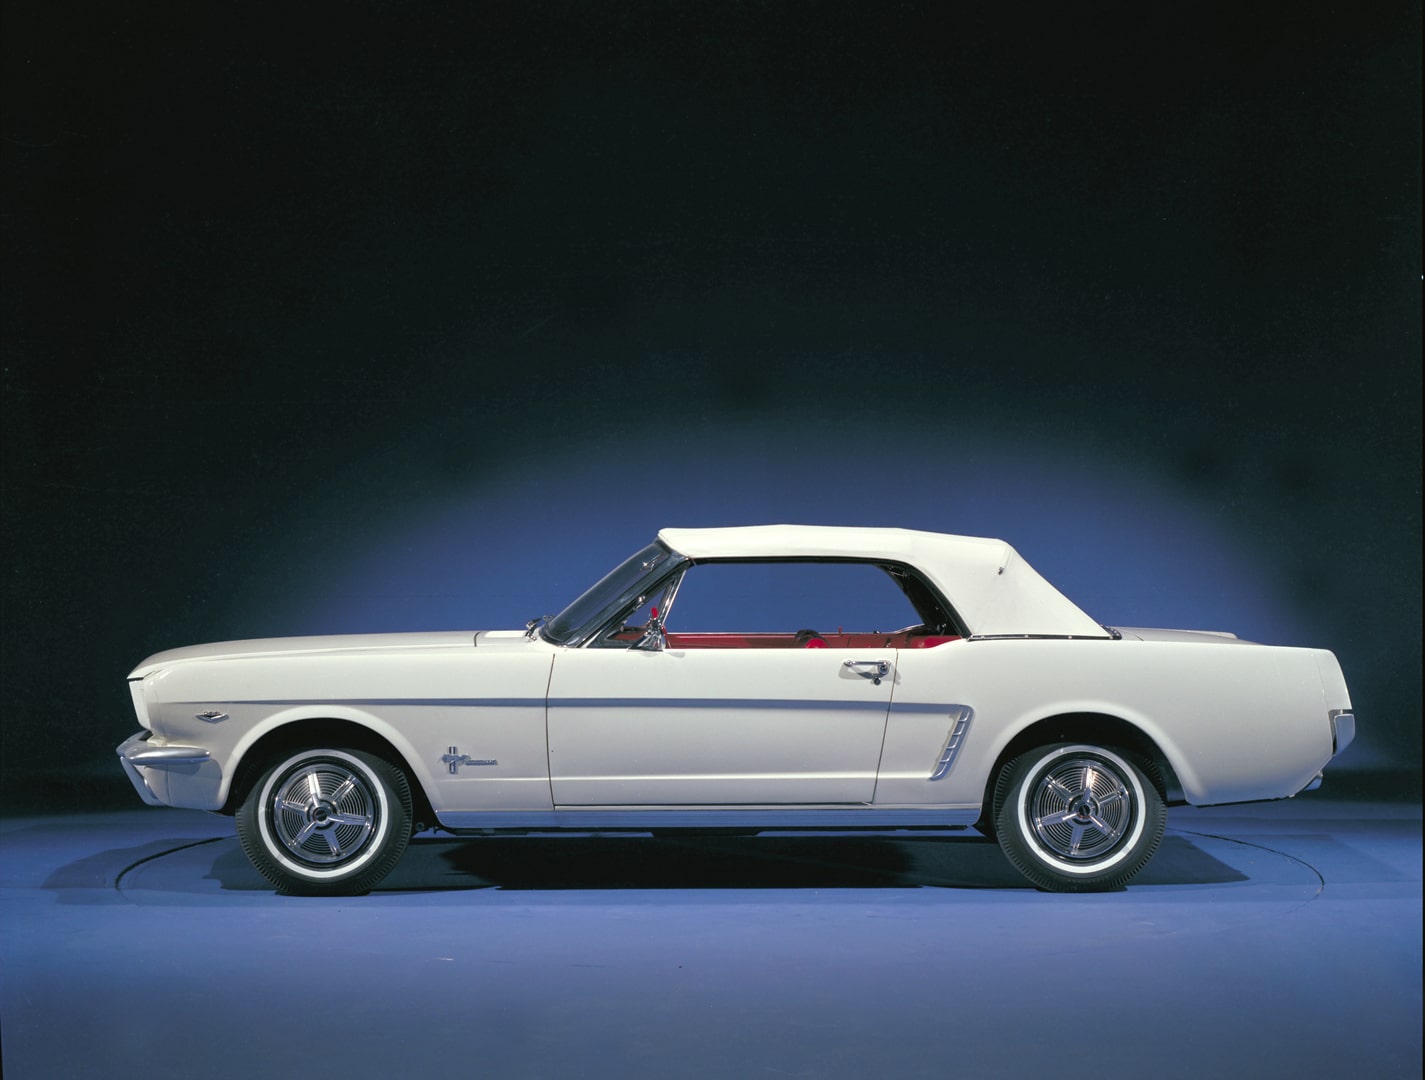 America's First Ford Mustang Buyer Still Owns Her Pony Car